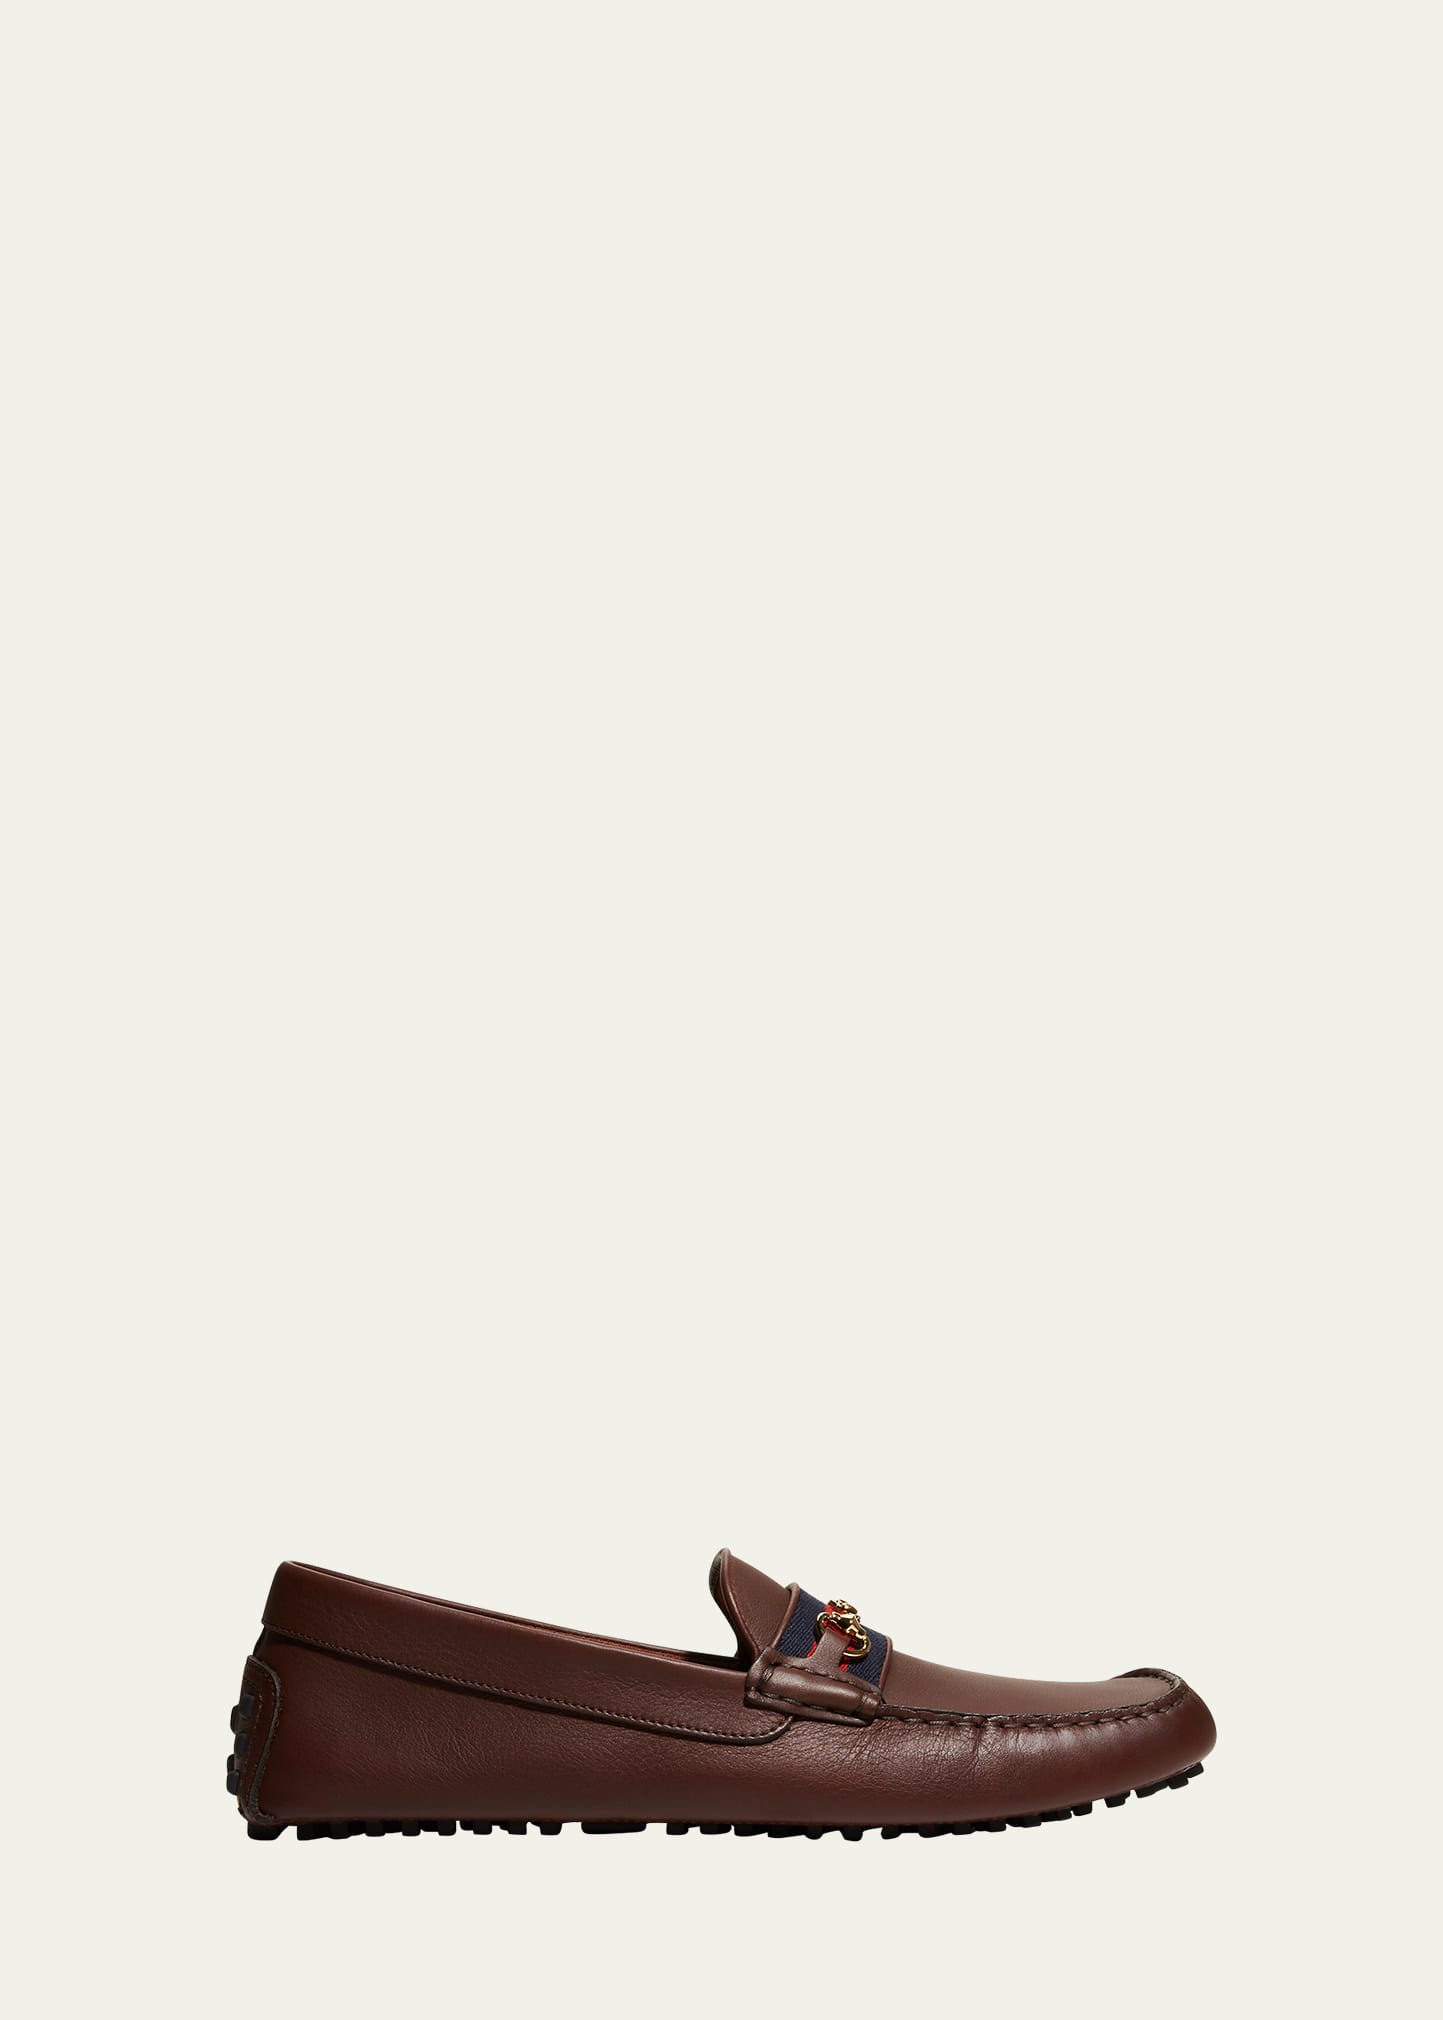 Gucci Men's Ayrton Gg-bit Leather Drivers In Cocoa